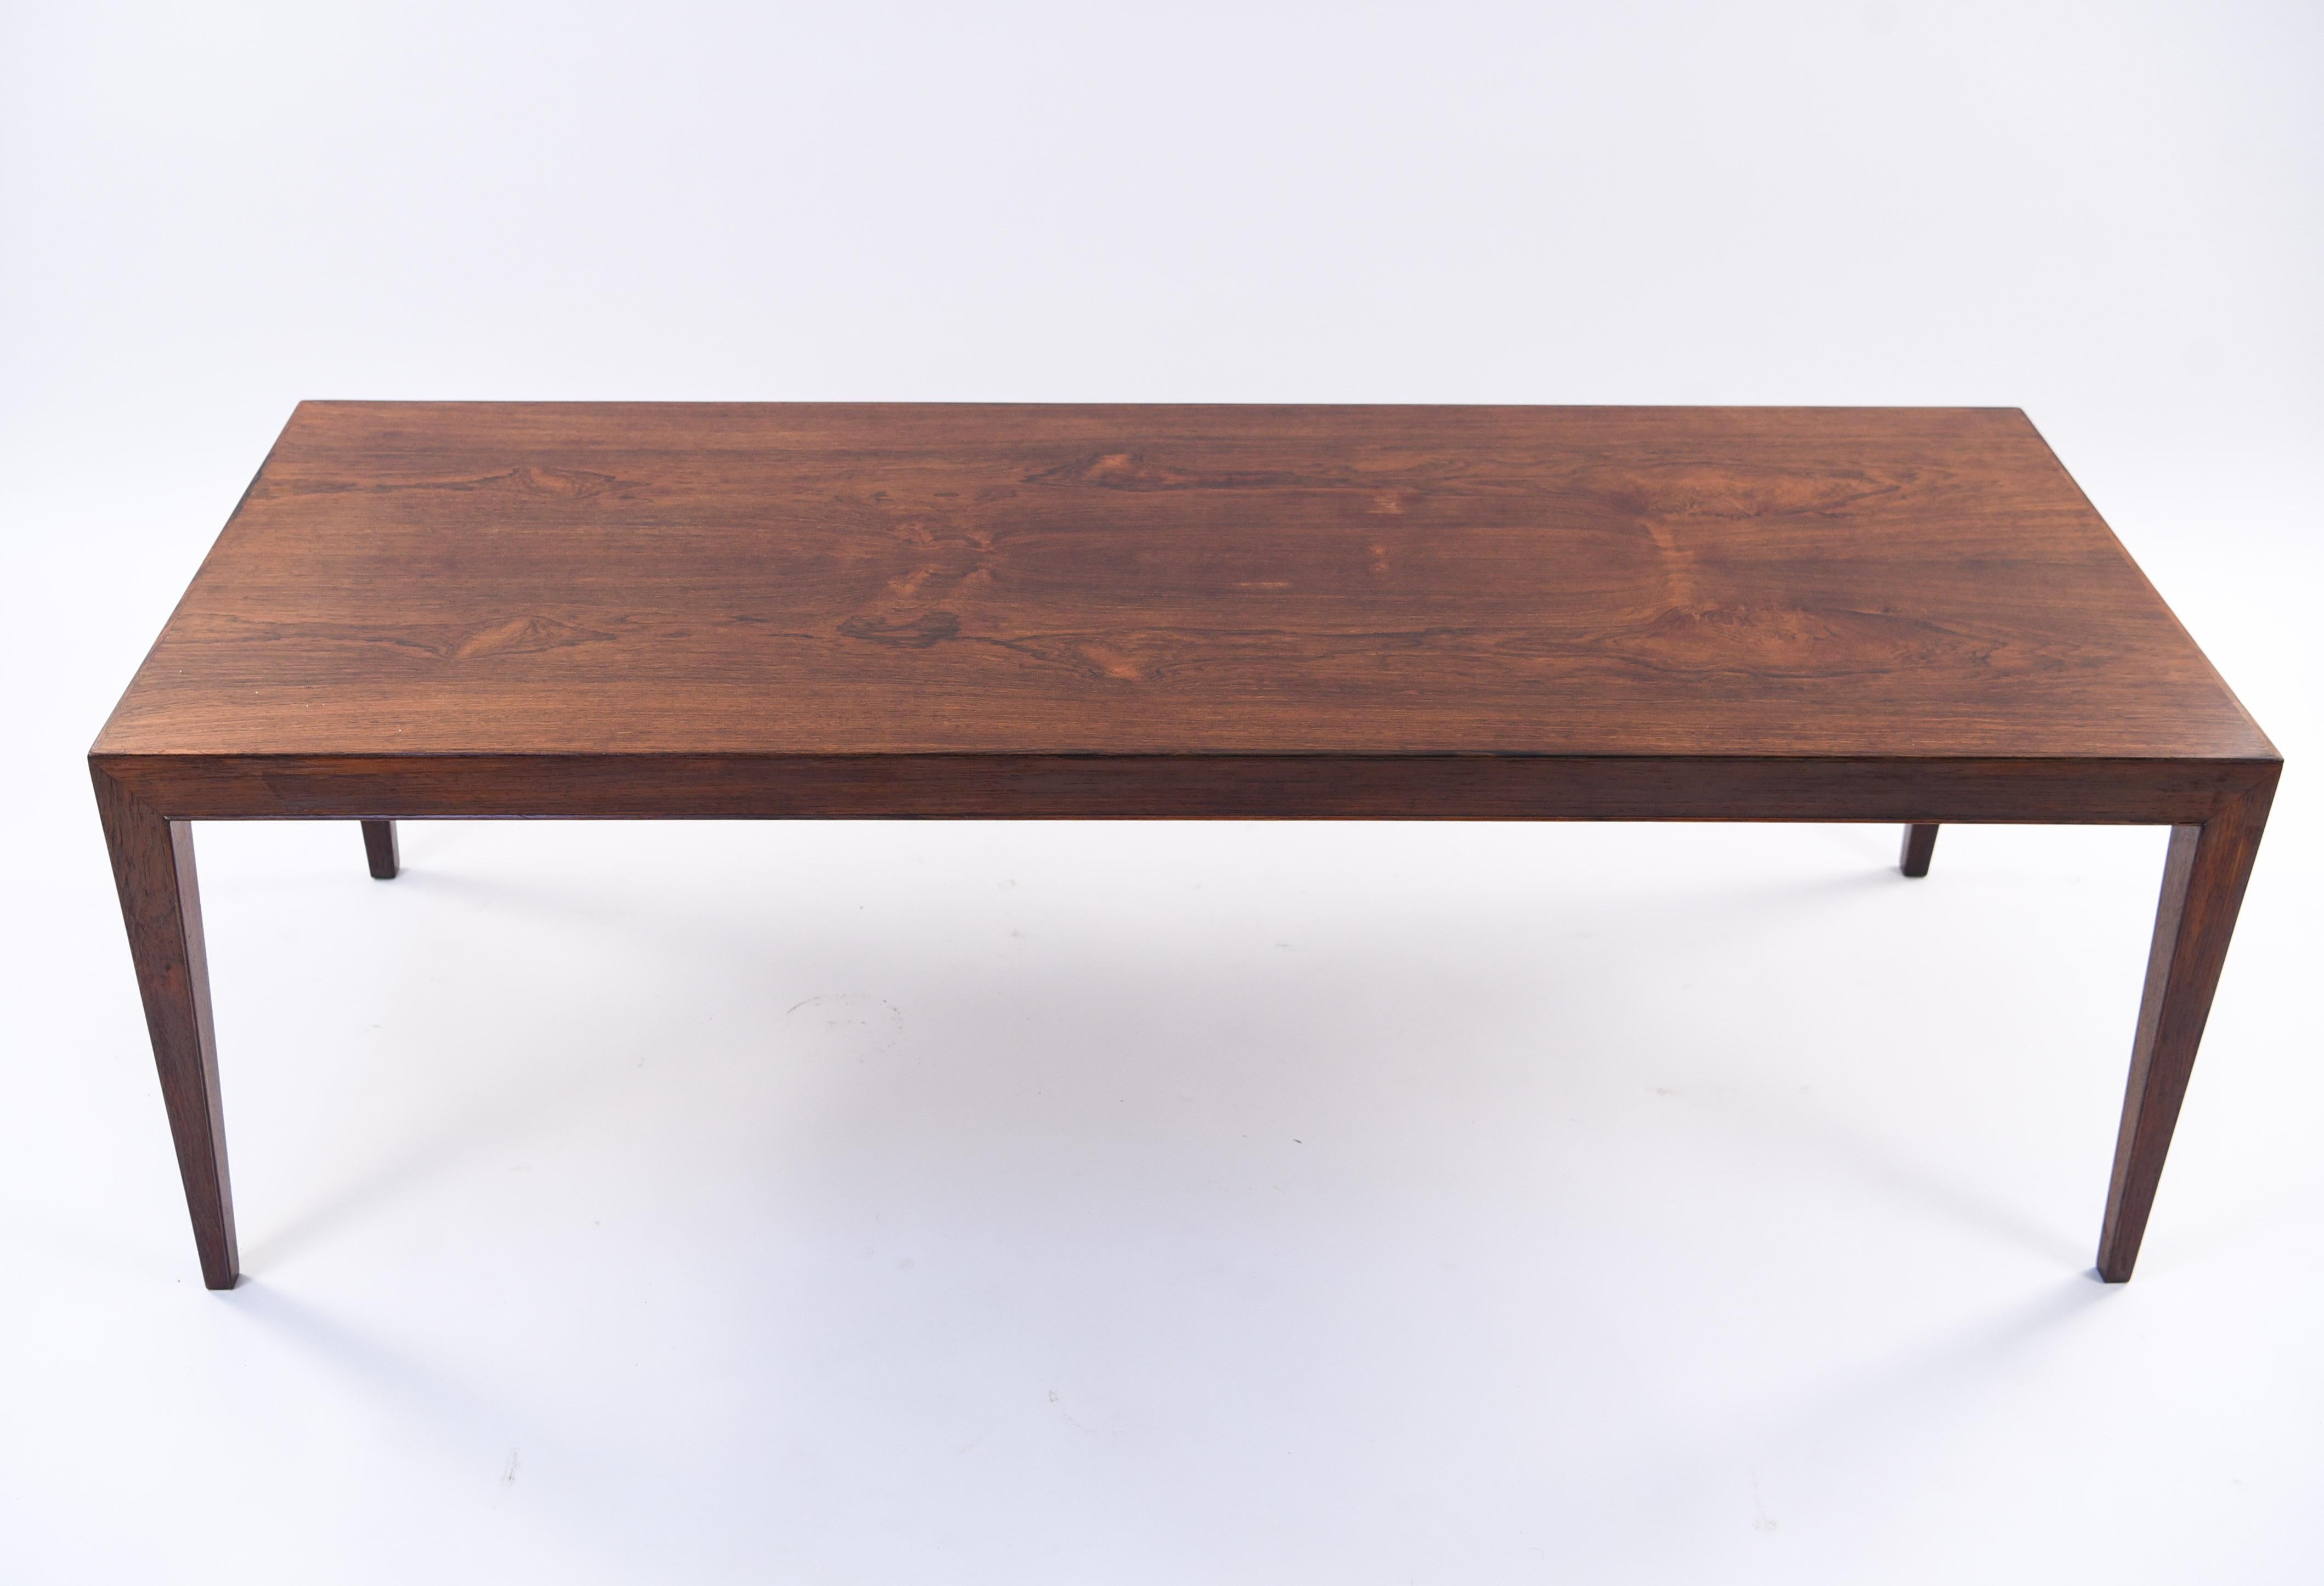 A Danish midcentury rosewood coffee table designed by Severin Hansen for Haslev. A simple, timeless Scandinavian Modern design with the high quality production of Haslev.